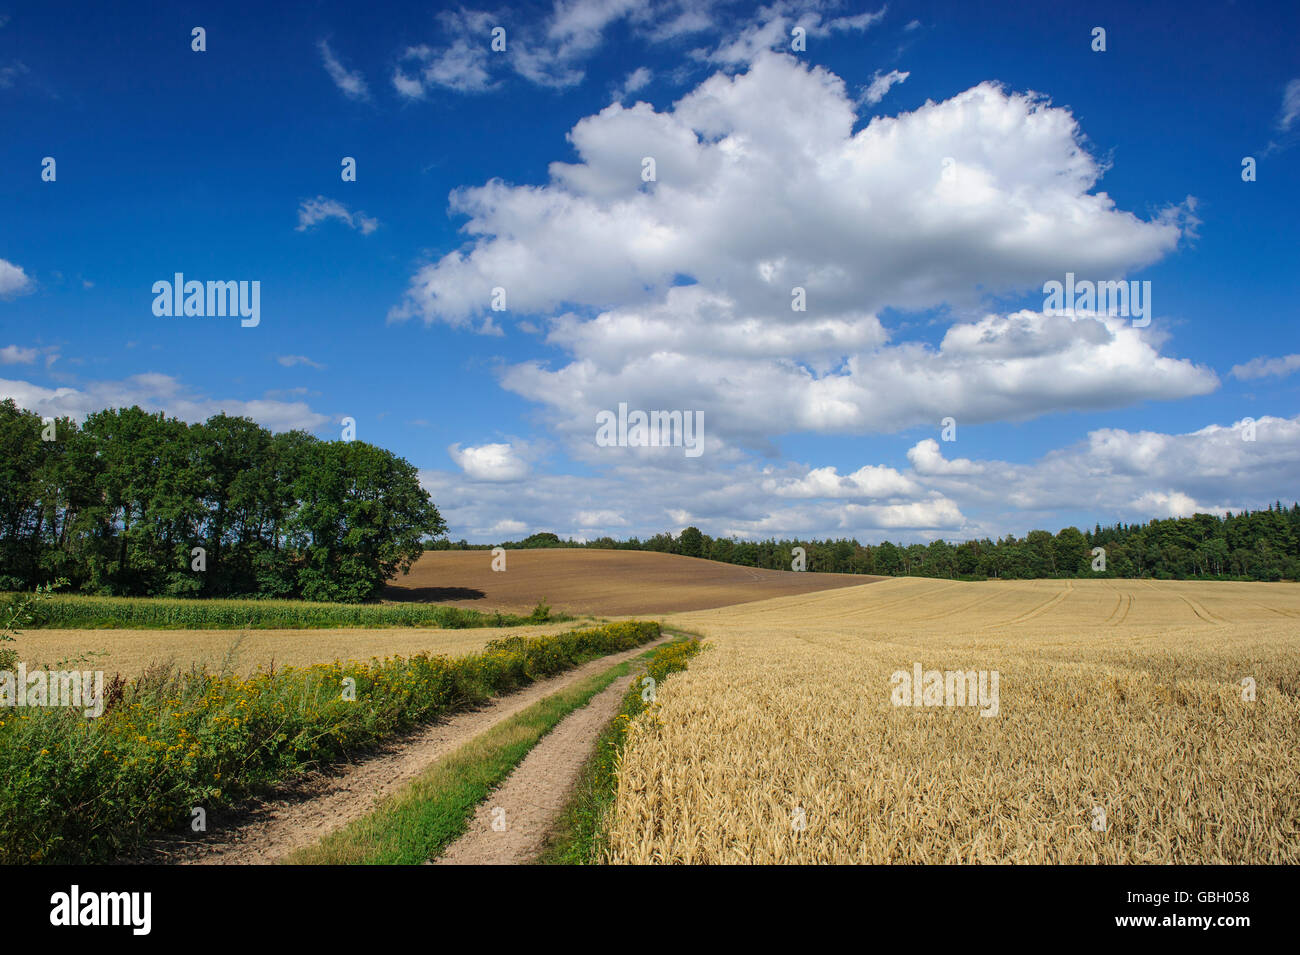 Cereal field, Damme, Lower Saxony, Germany Stock Photo